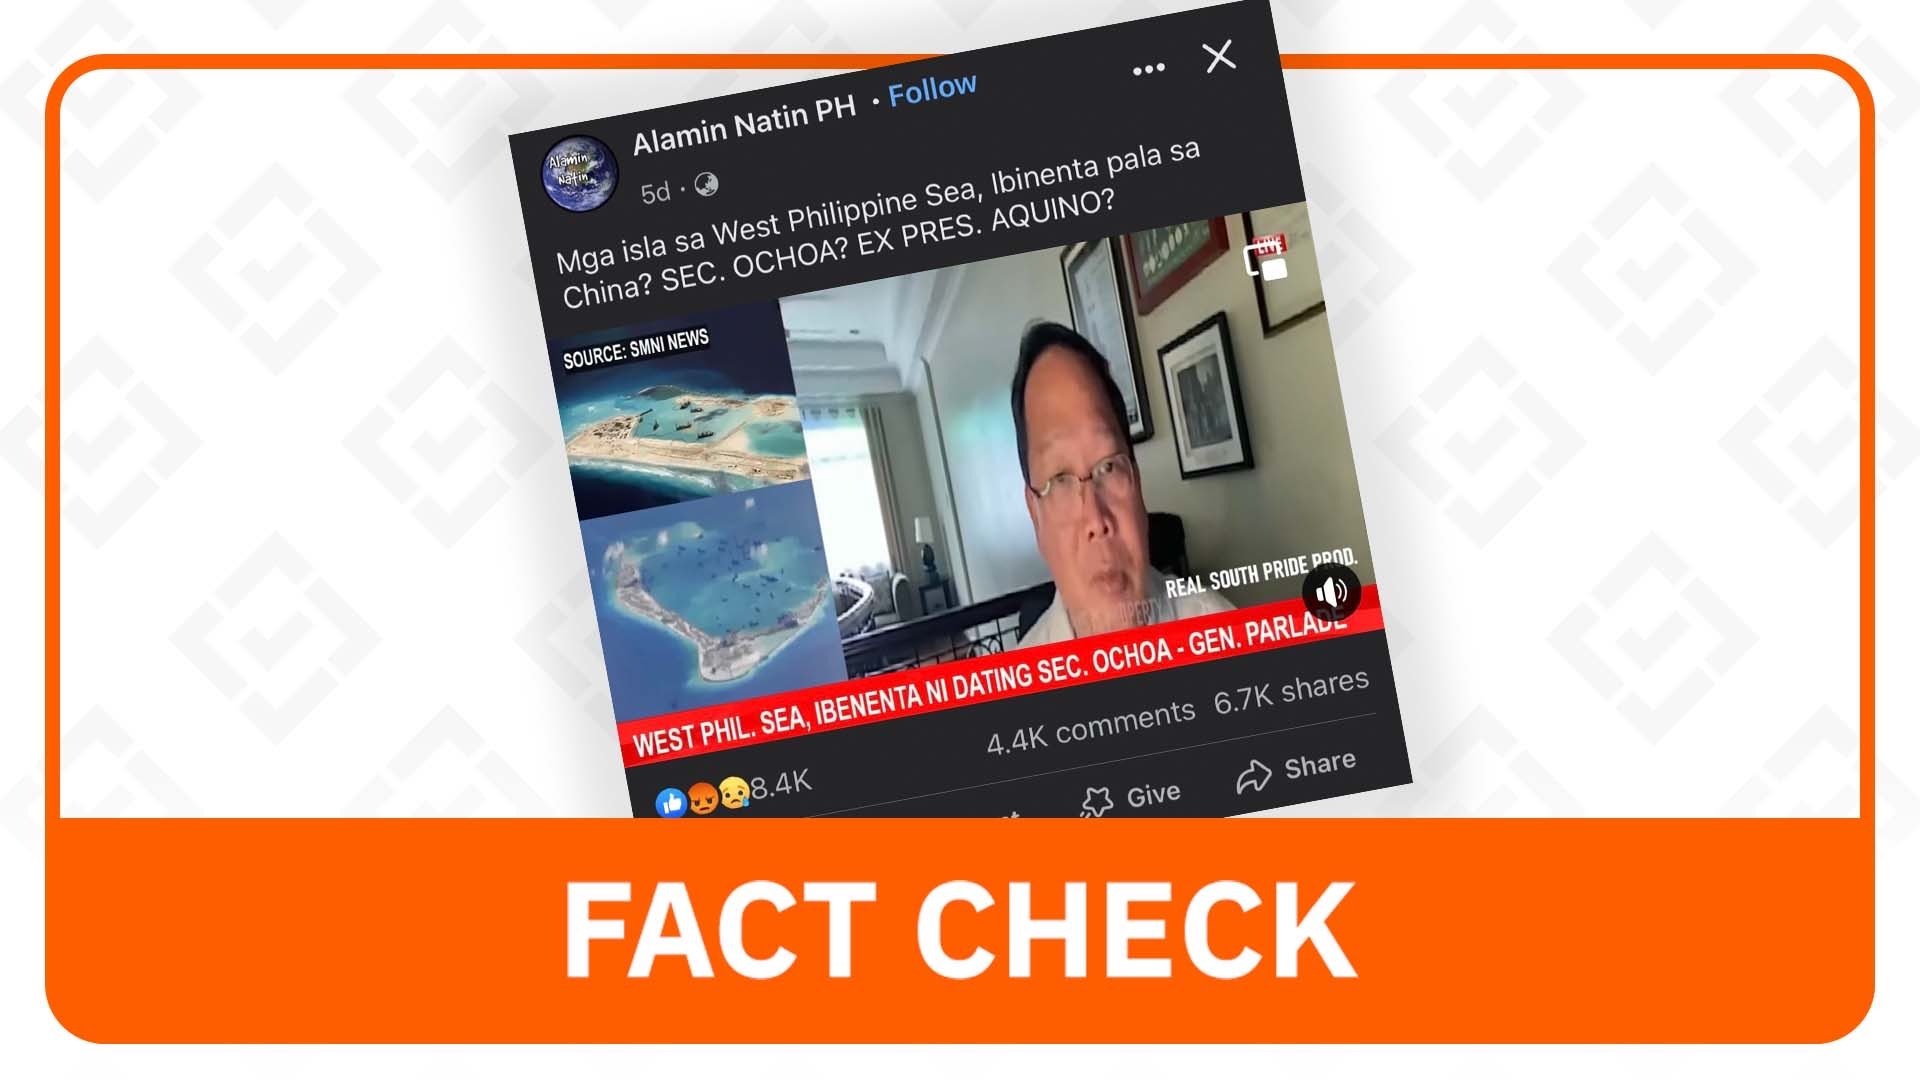 FACT CHECK: Filipinos opposed China’s reclamation even before Hague ruling